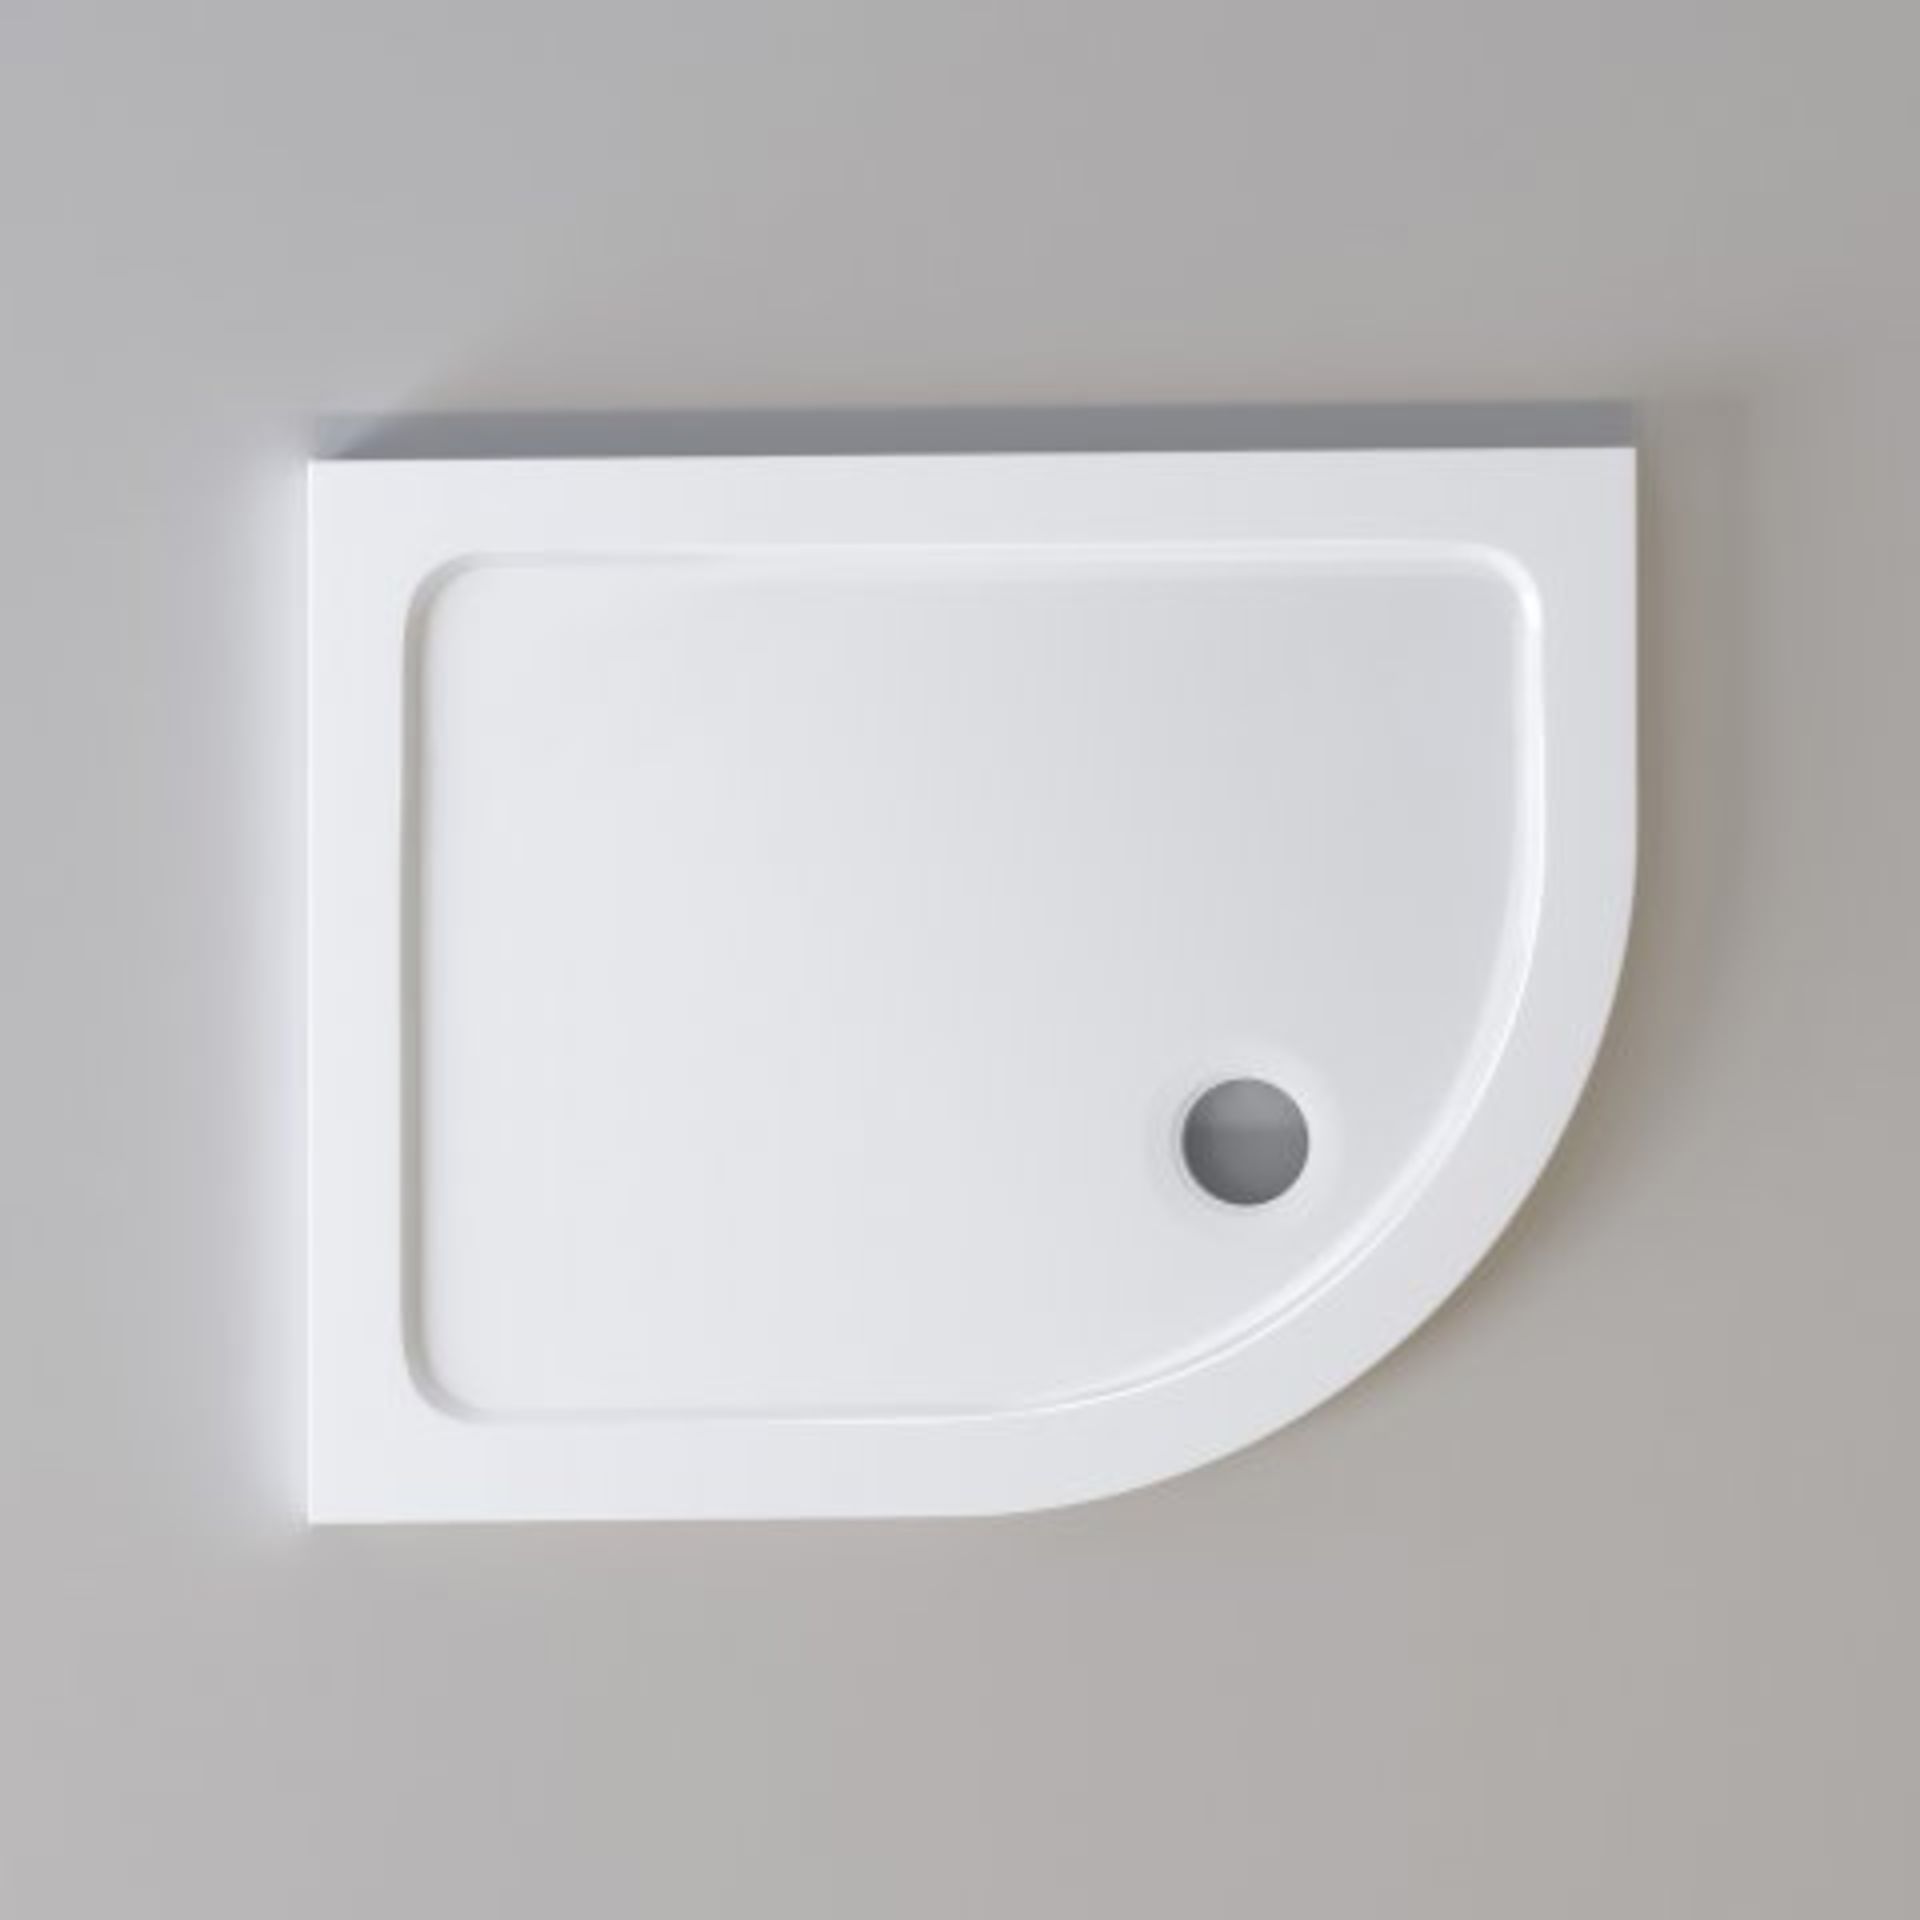 (33) 1000x800mm Offset Quadrant Ultraslim Stone Shower Tray - Right. RRP £249.99. Magnificently - Image 2 of 2